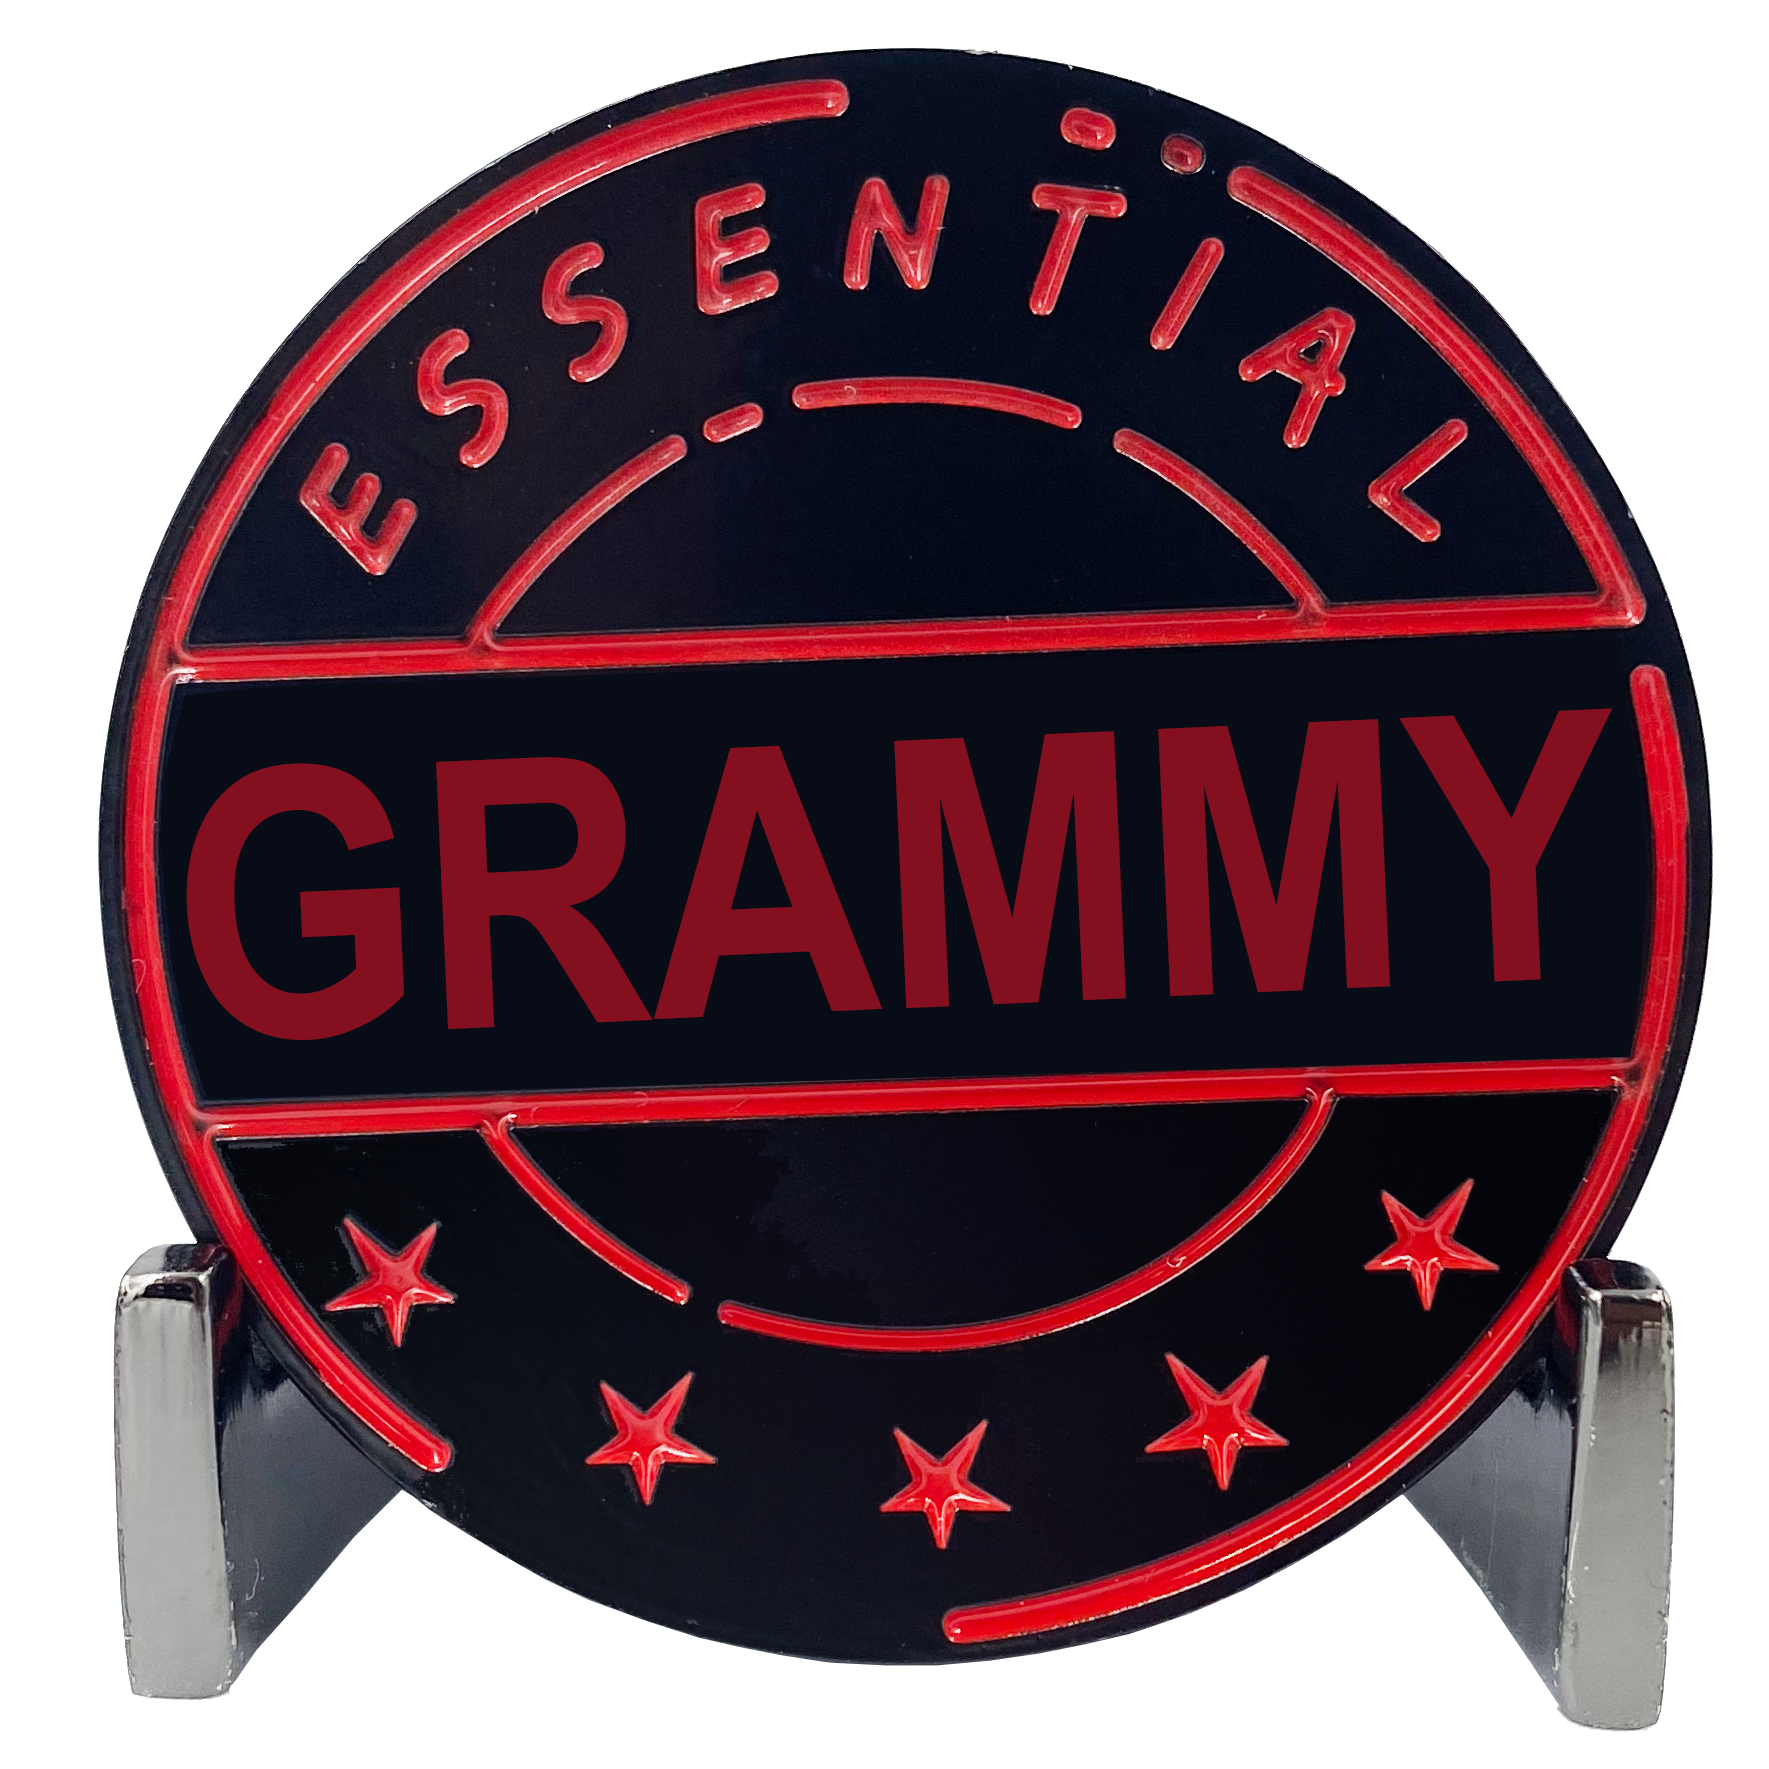 CL8-17 Essential Workers Grammy Challenge Coin perfect for Mother's Day or Grandma's Birthday